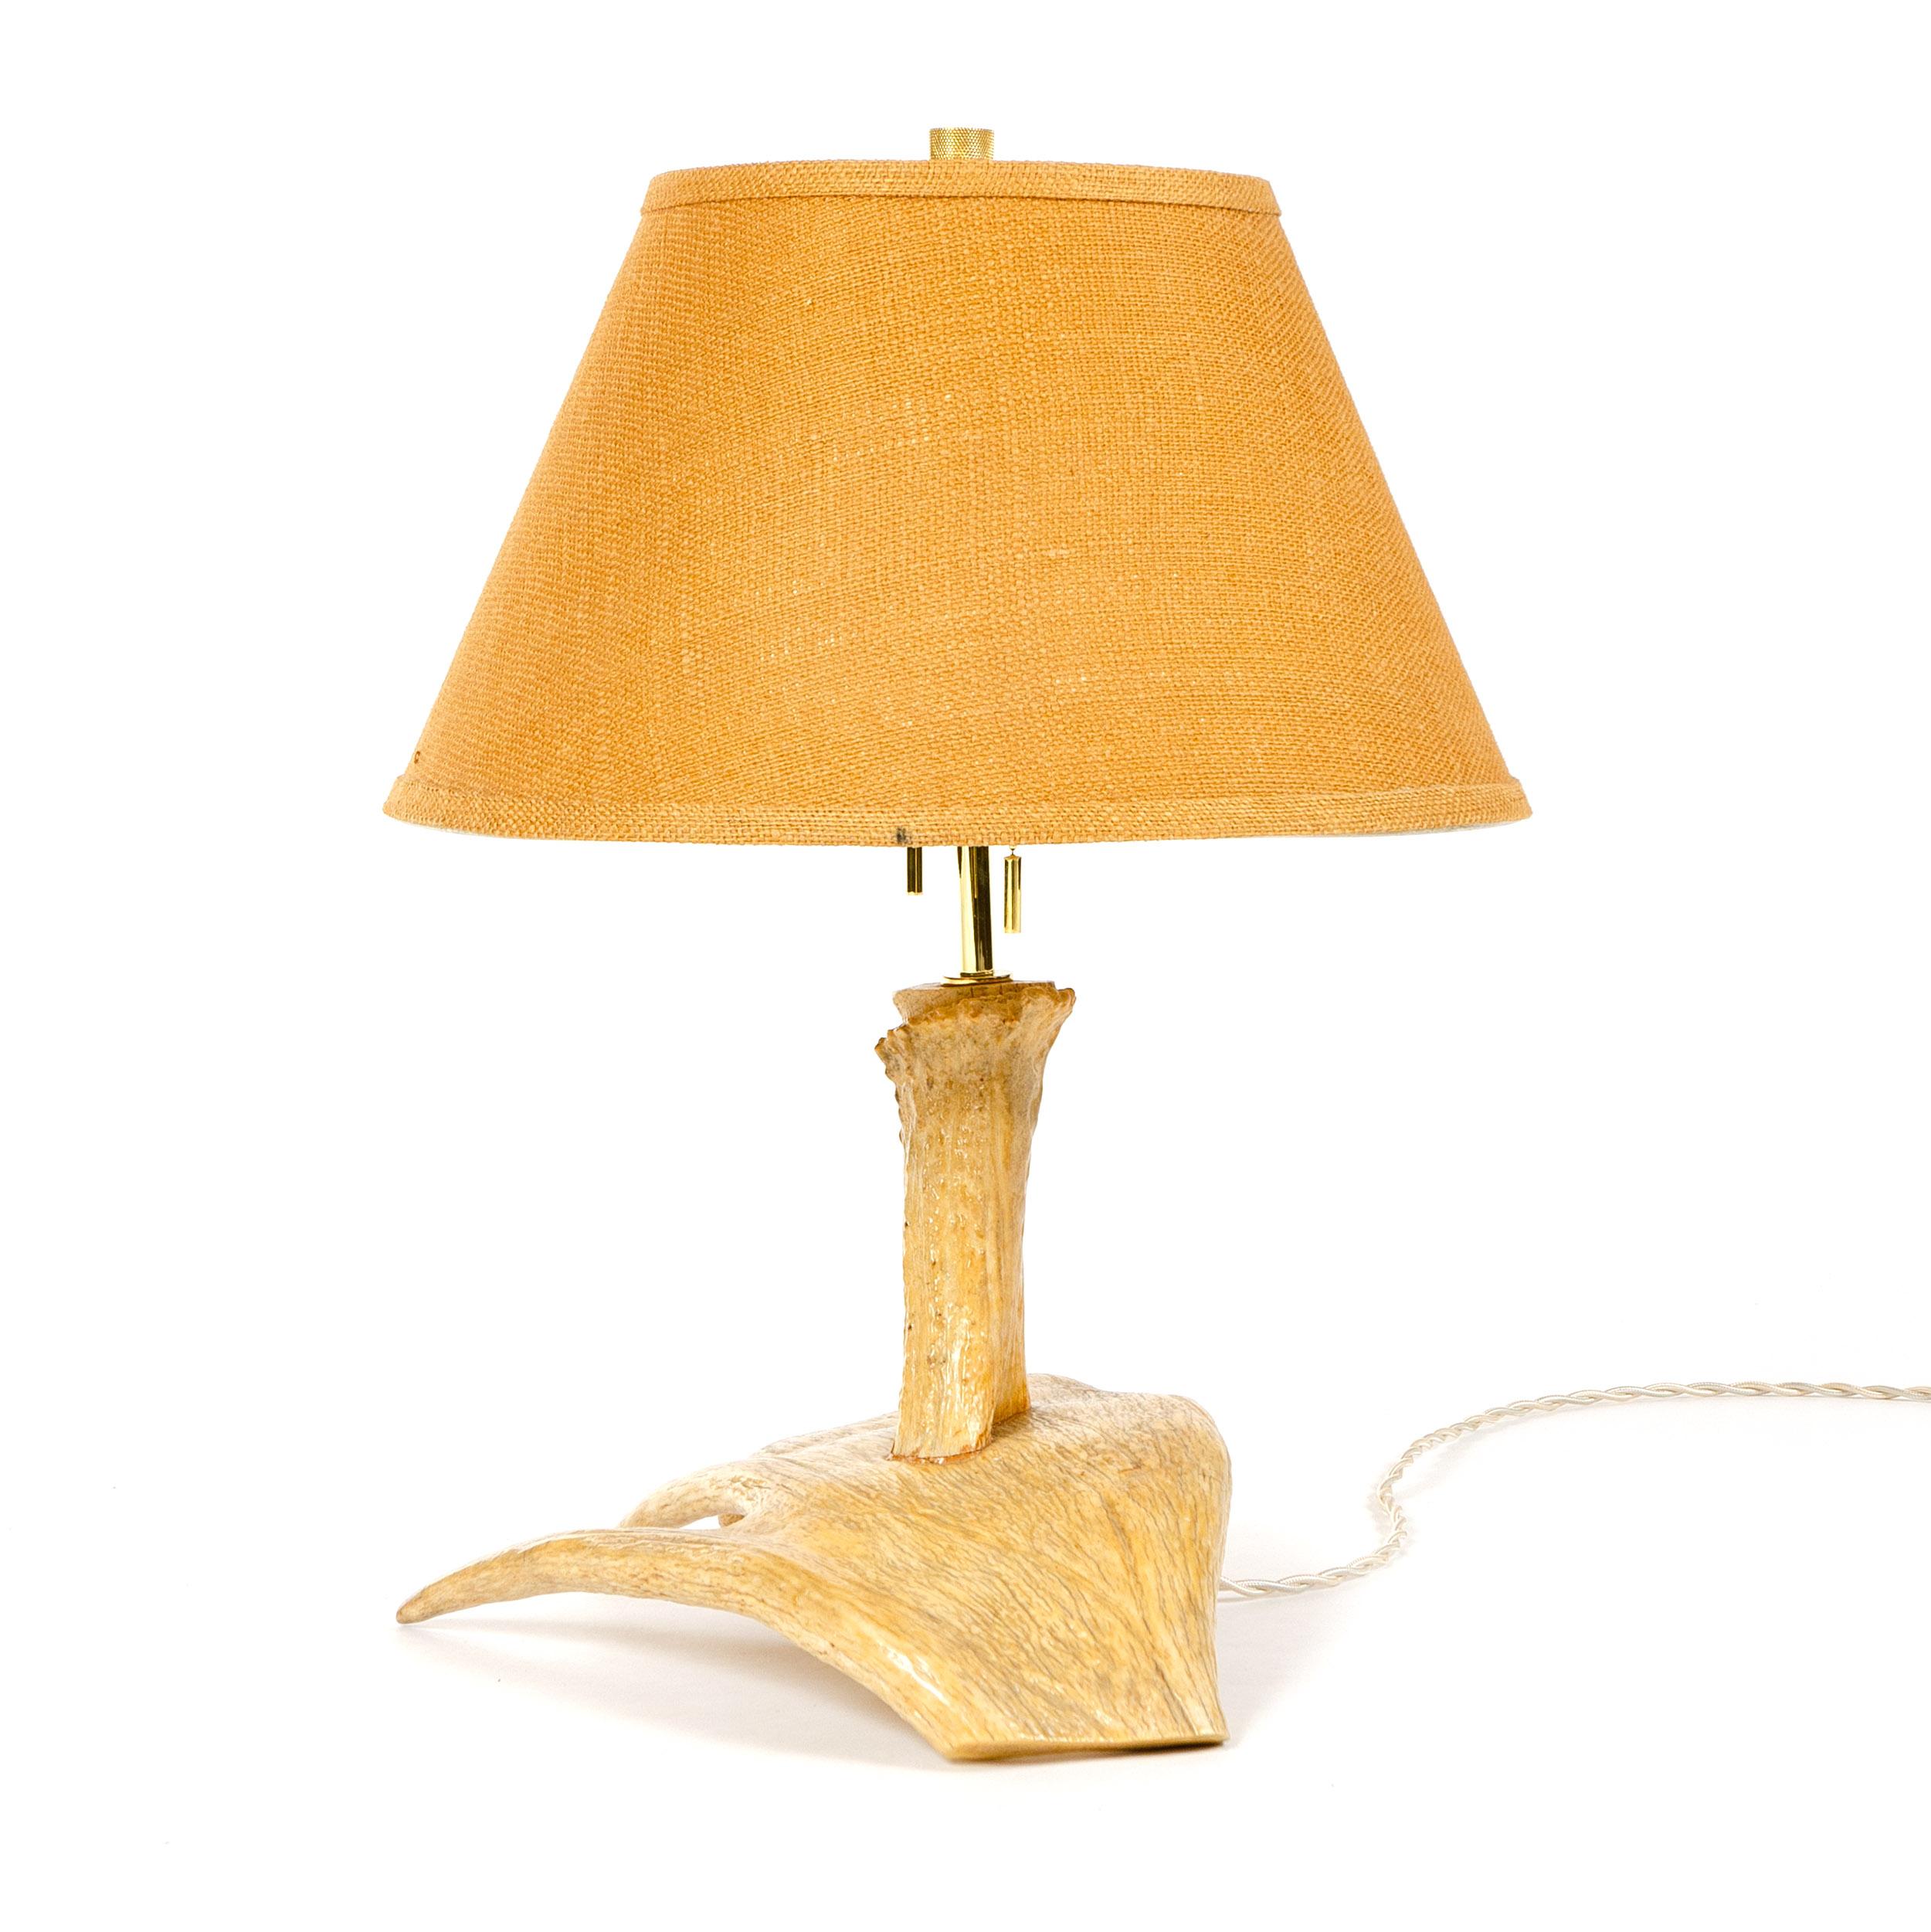 American Craftsman 1970s Antler Table Lamp with Burlap Shade